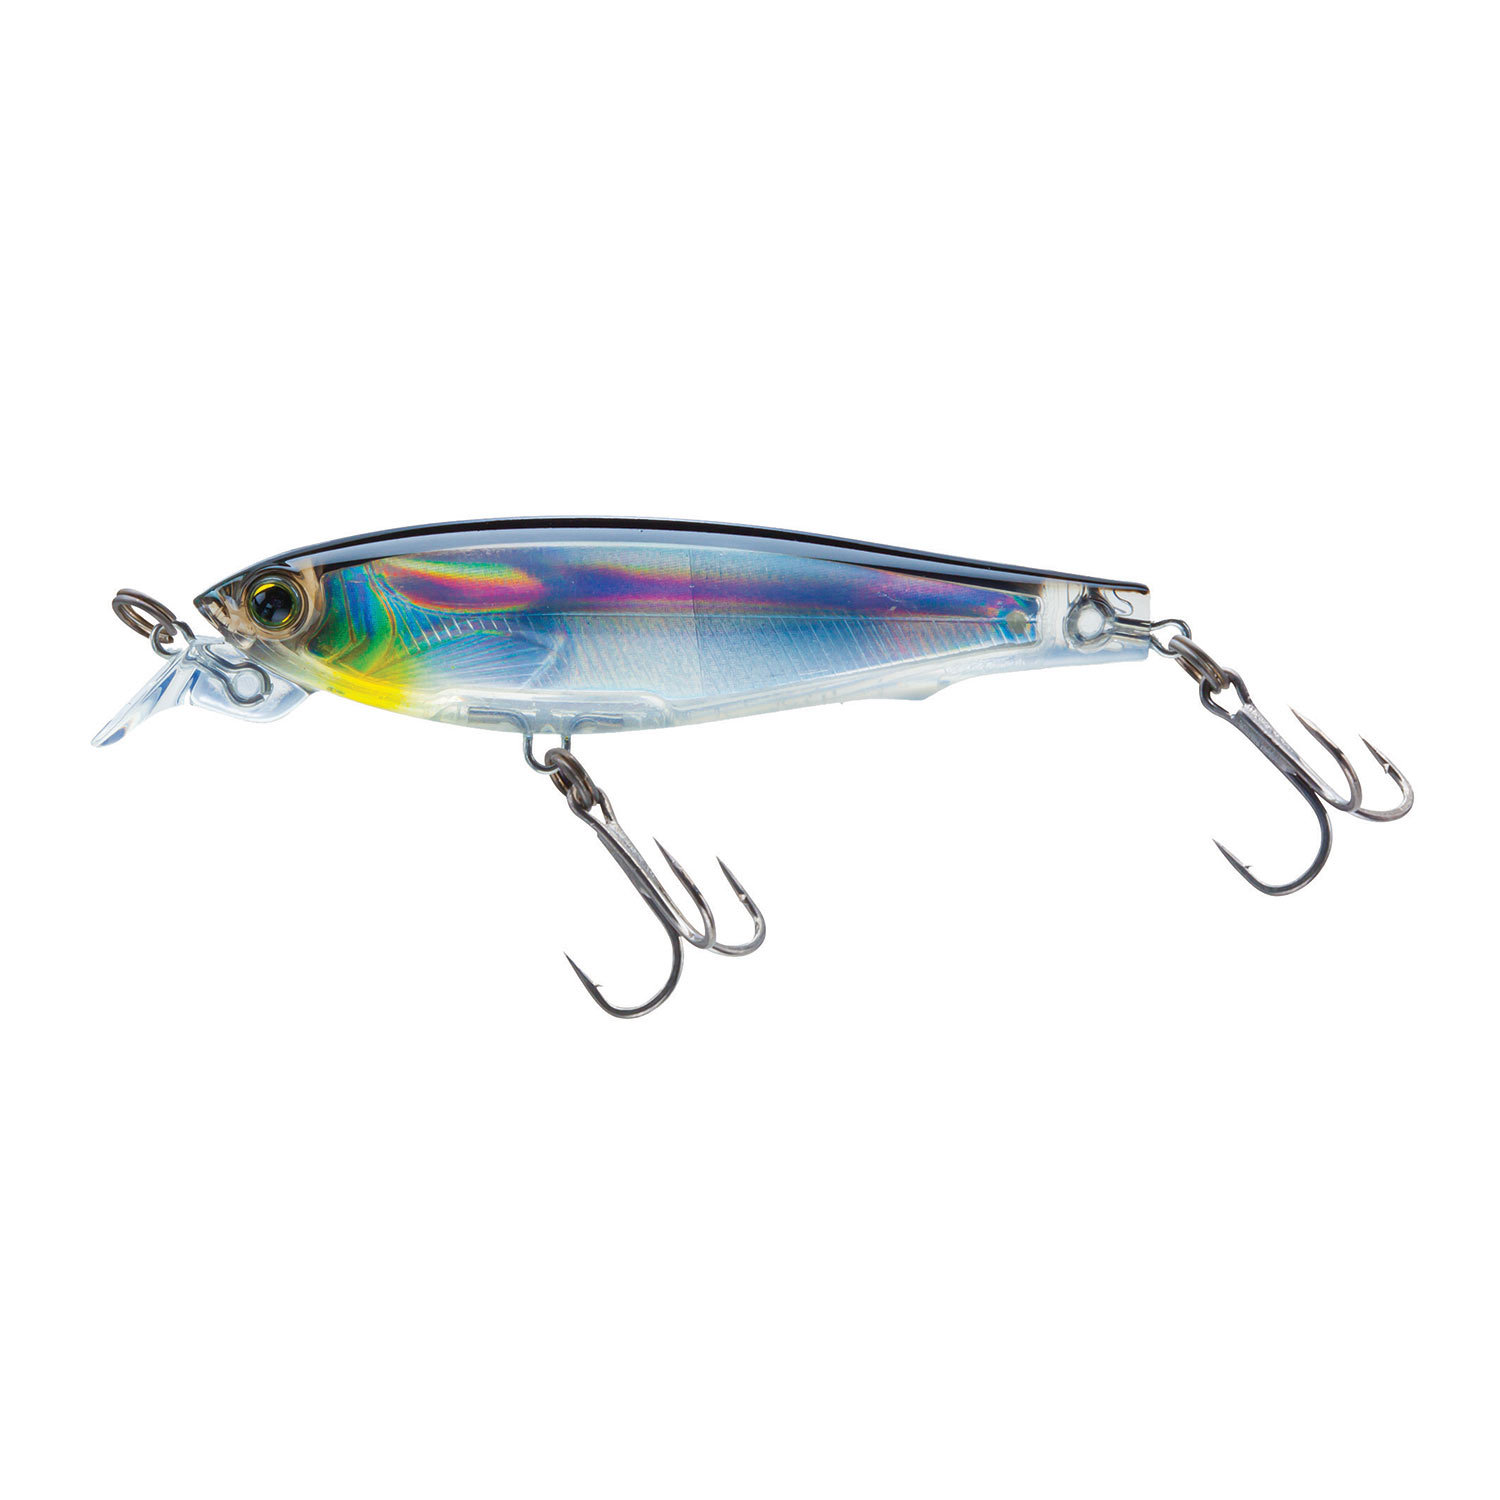 3DS Minnow™ Fishing Lure, 2 3/4"